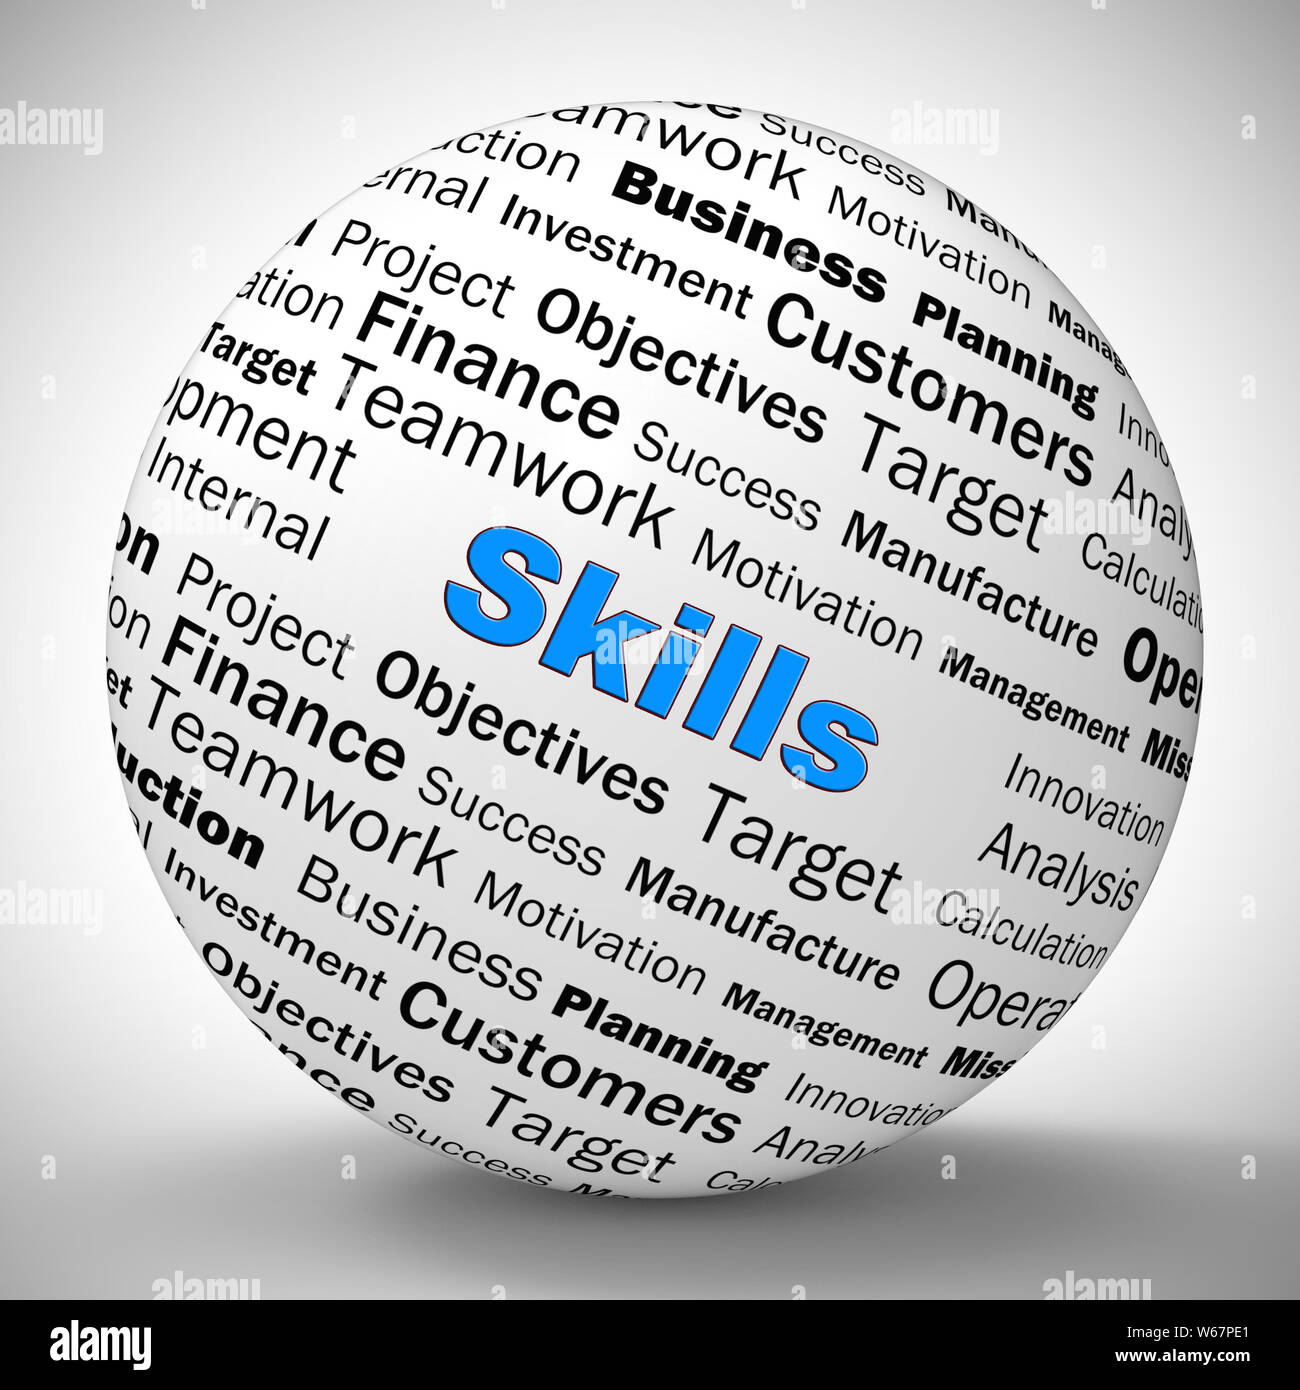 Skill or skills means expertise and KNOWHOW to be proficient. Skilled personnel and staff with great knowledge - 3d illustration Stock Photo